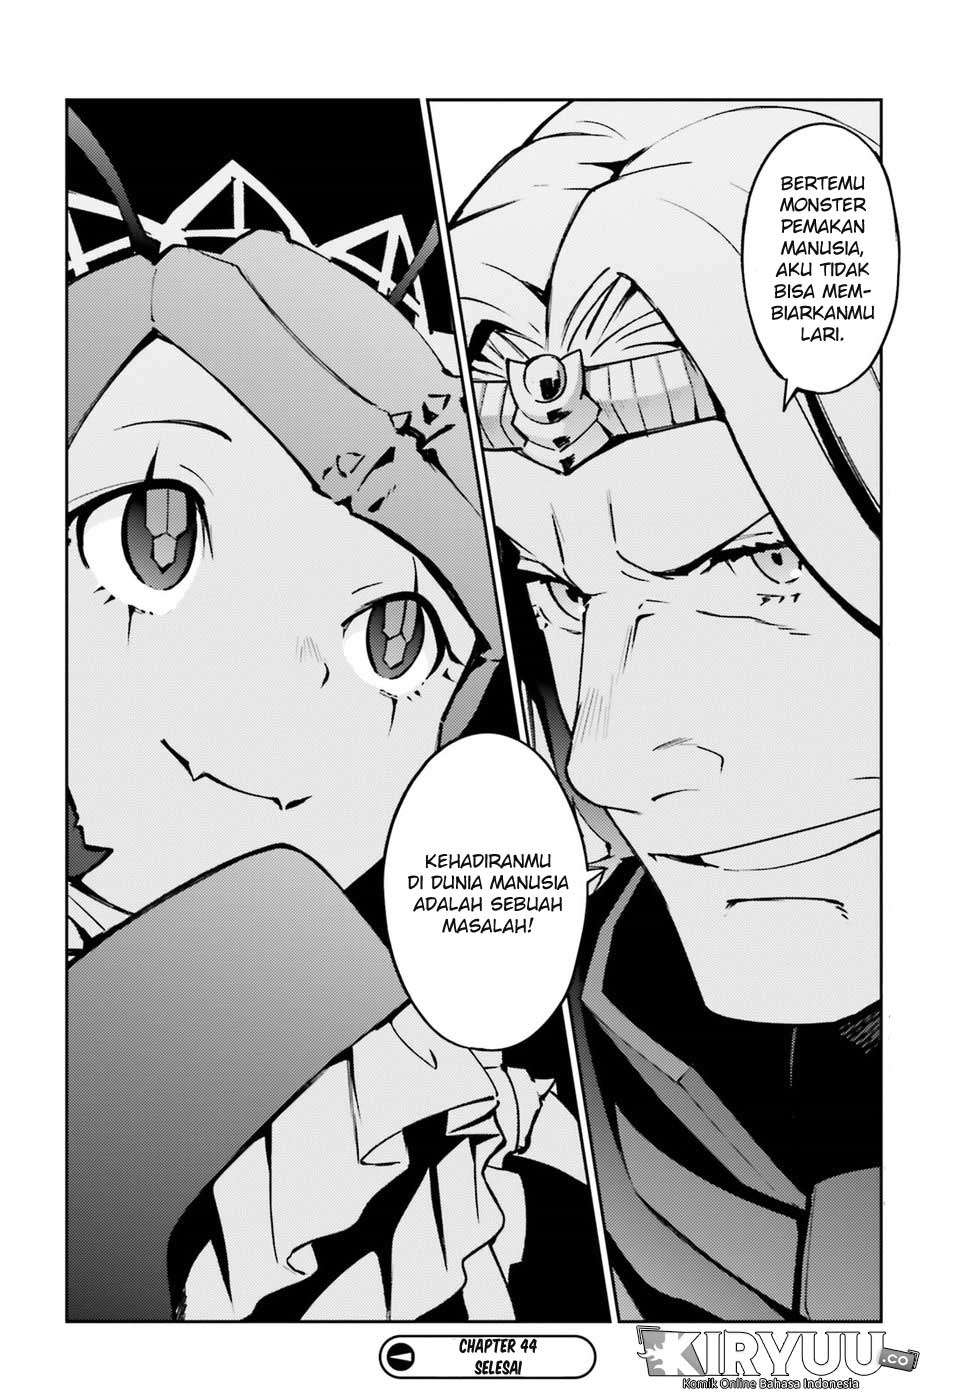 Overlord Chapter 44 36